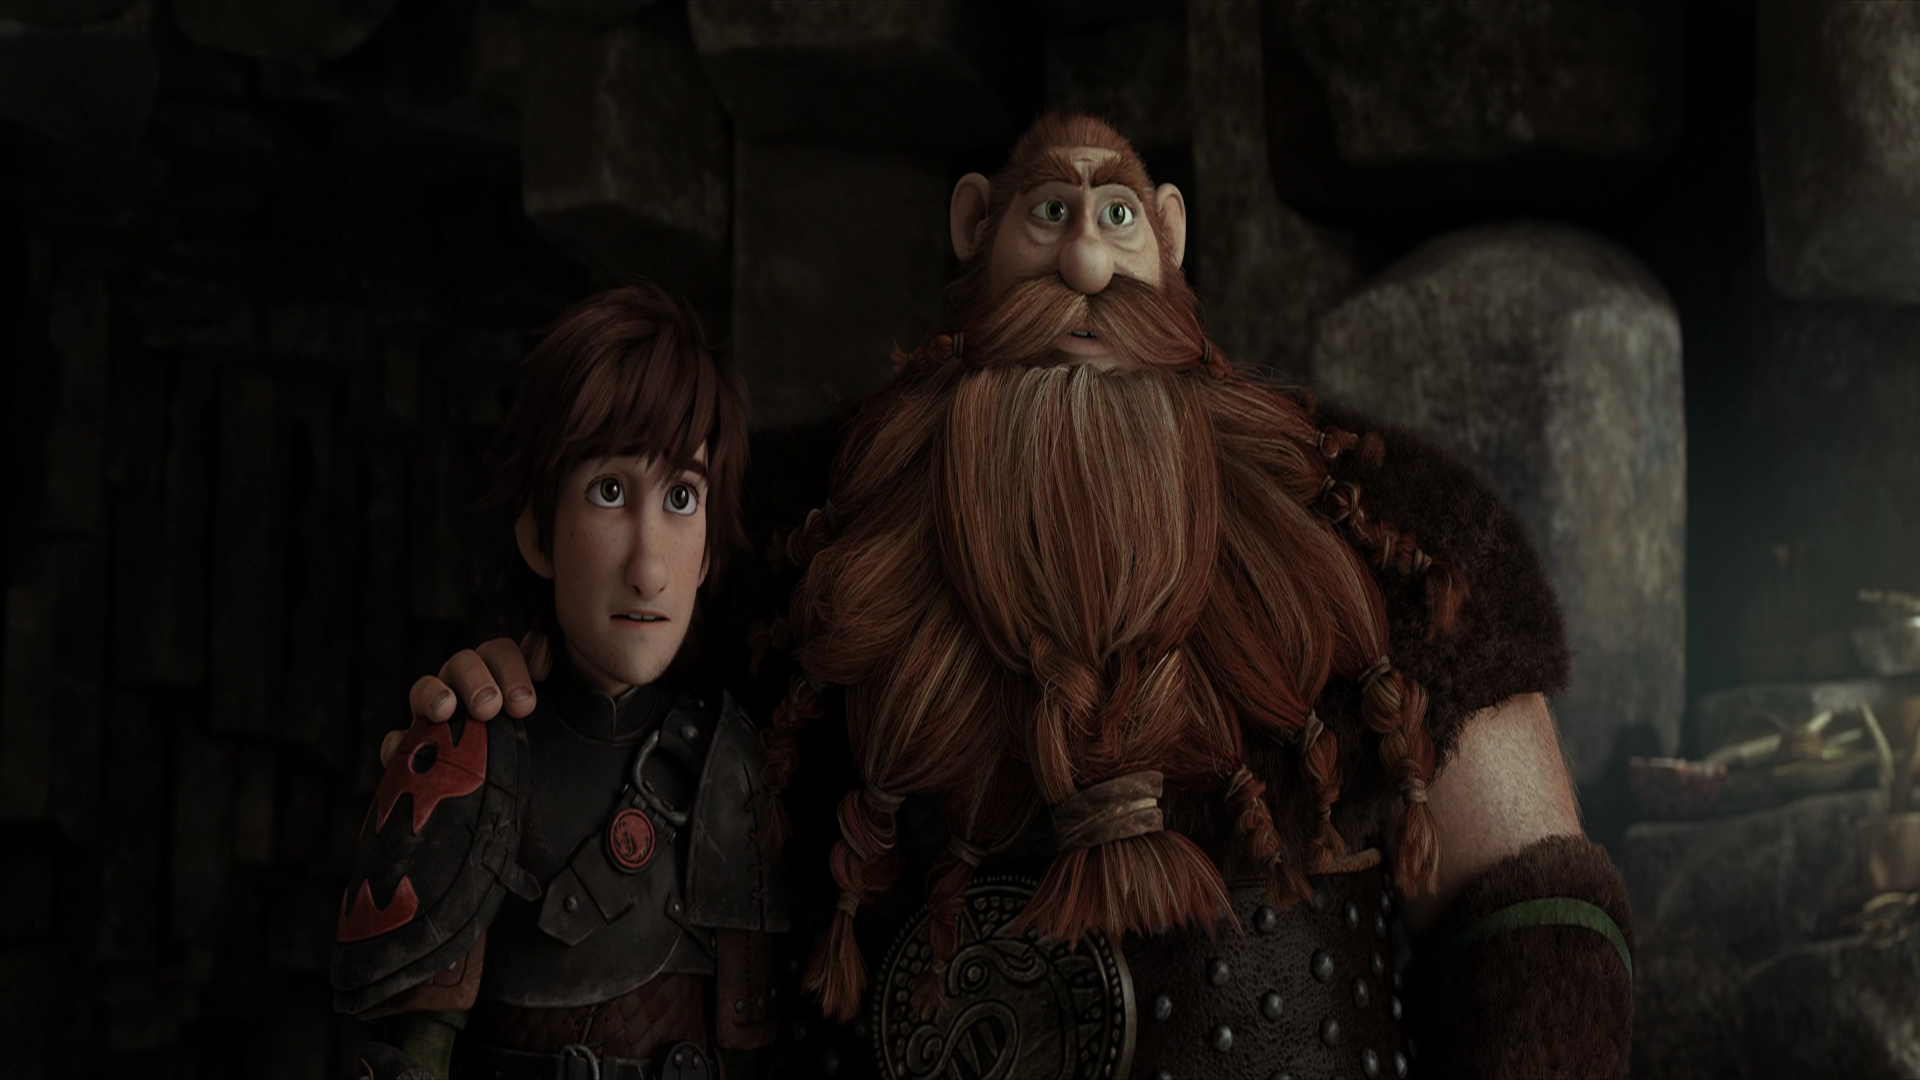 How To Train Your Dragon 2 Hiccup How To Train Your Dragon Stoick How To Train Your Dragon 1920x1080